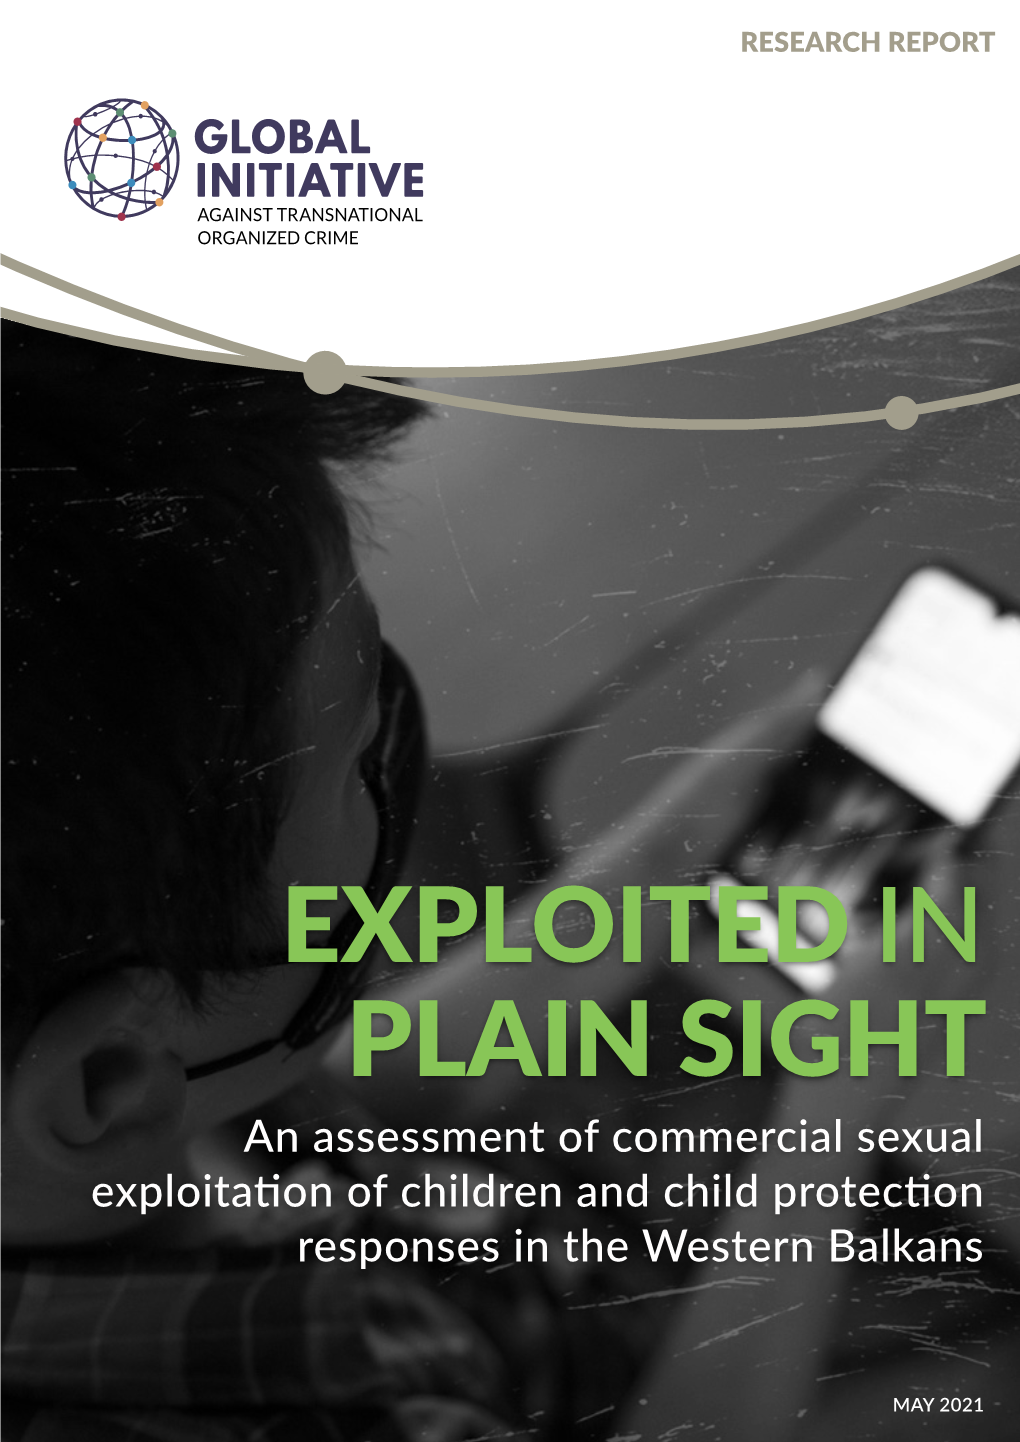 EXPLOITED in PLAIN SIGHT an Assessment of Commercial Sexual Exploitation of Children and Child Protection Responses in the Western Balkans